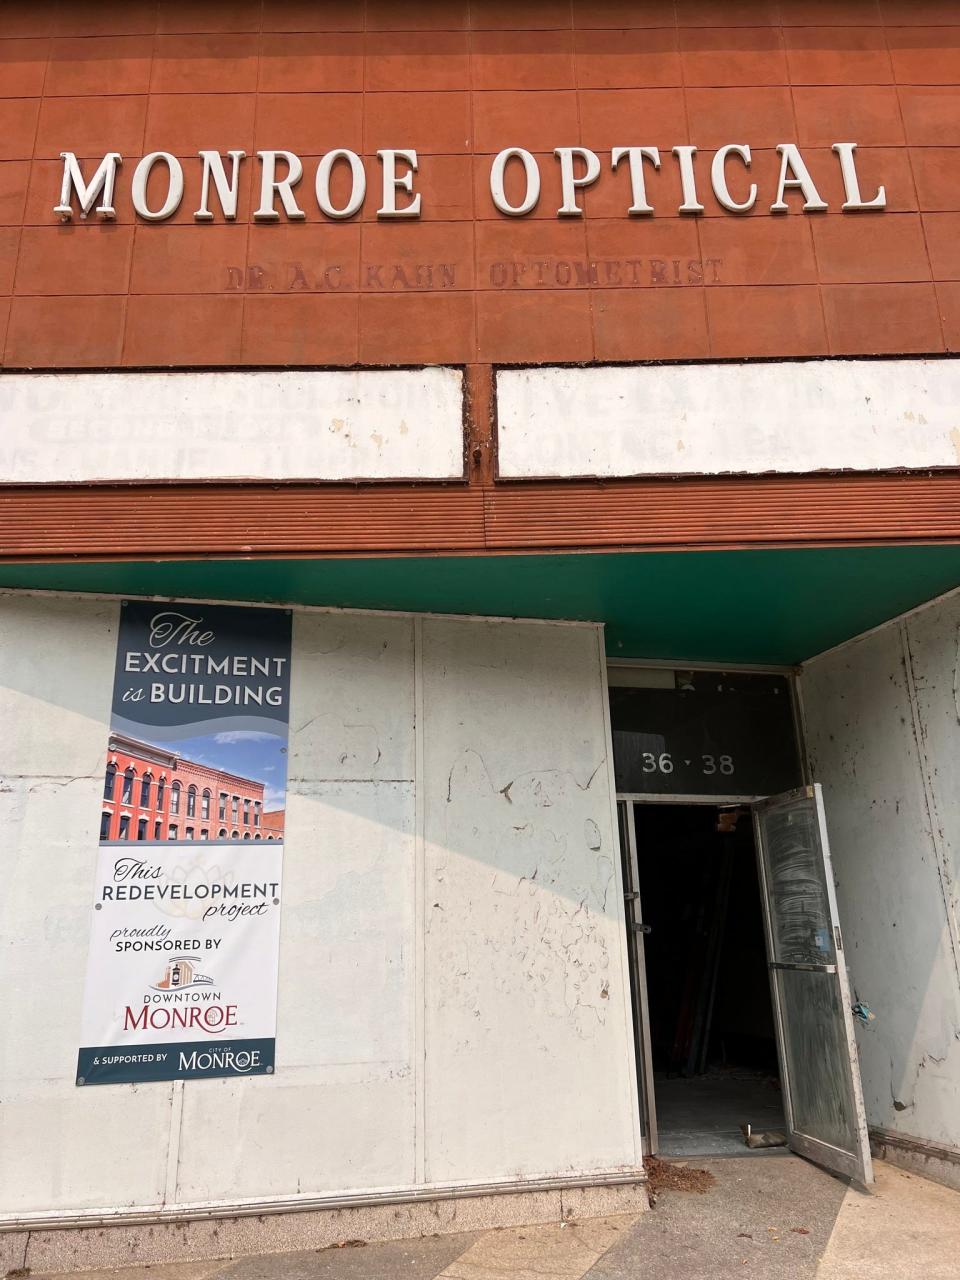 The old Monroe Optical Building with entrances at 36-38 S. Monroe St. and 13 W. Front St. is under renovation after sitting vacant for decades. The city of Monroe's Downtown Development Authority purchased the building for $90,000 earlier this year and expects to invest more than half a million to prepare the site for redevelopment.